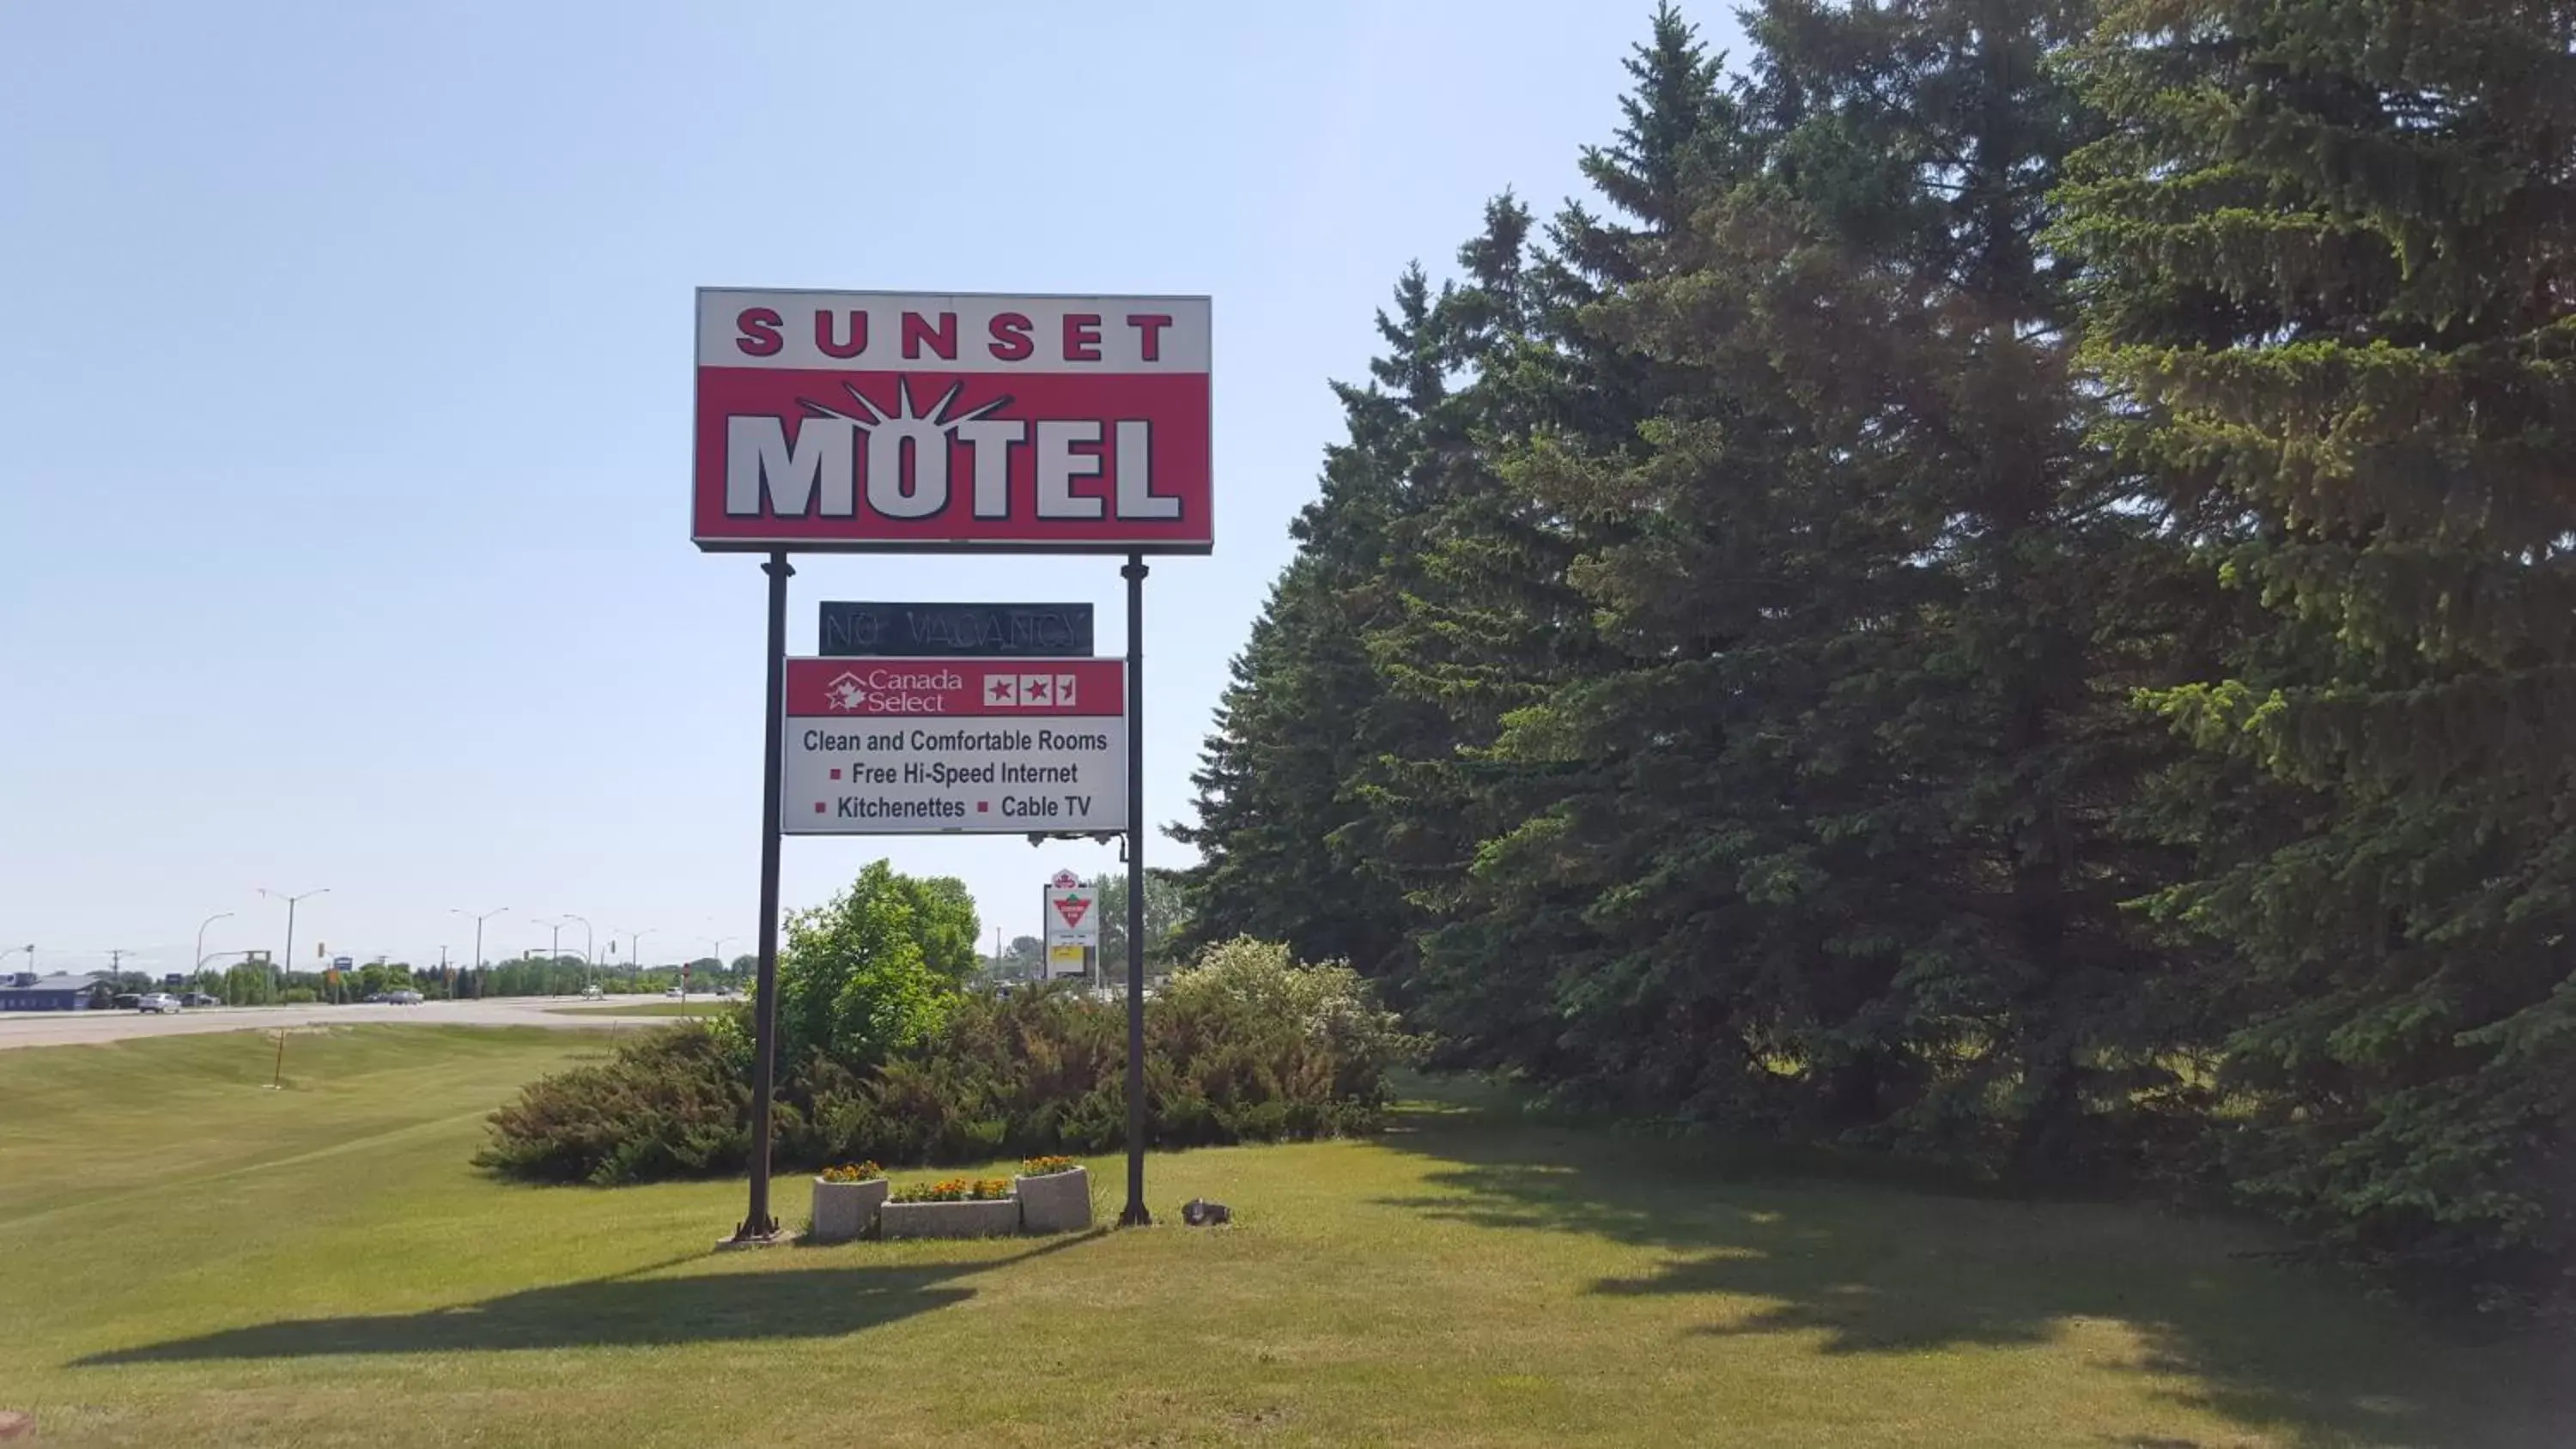 Property logo or sign in Sunset motel